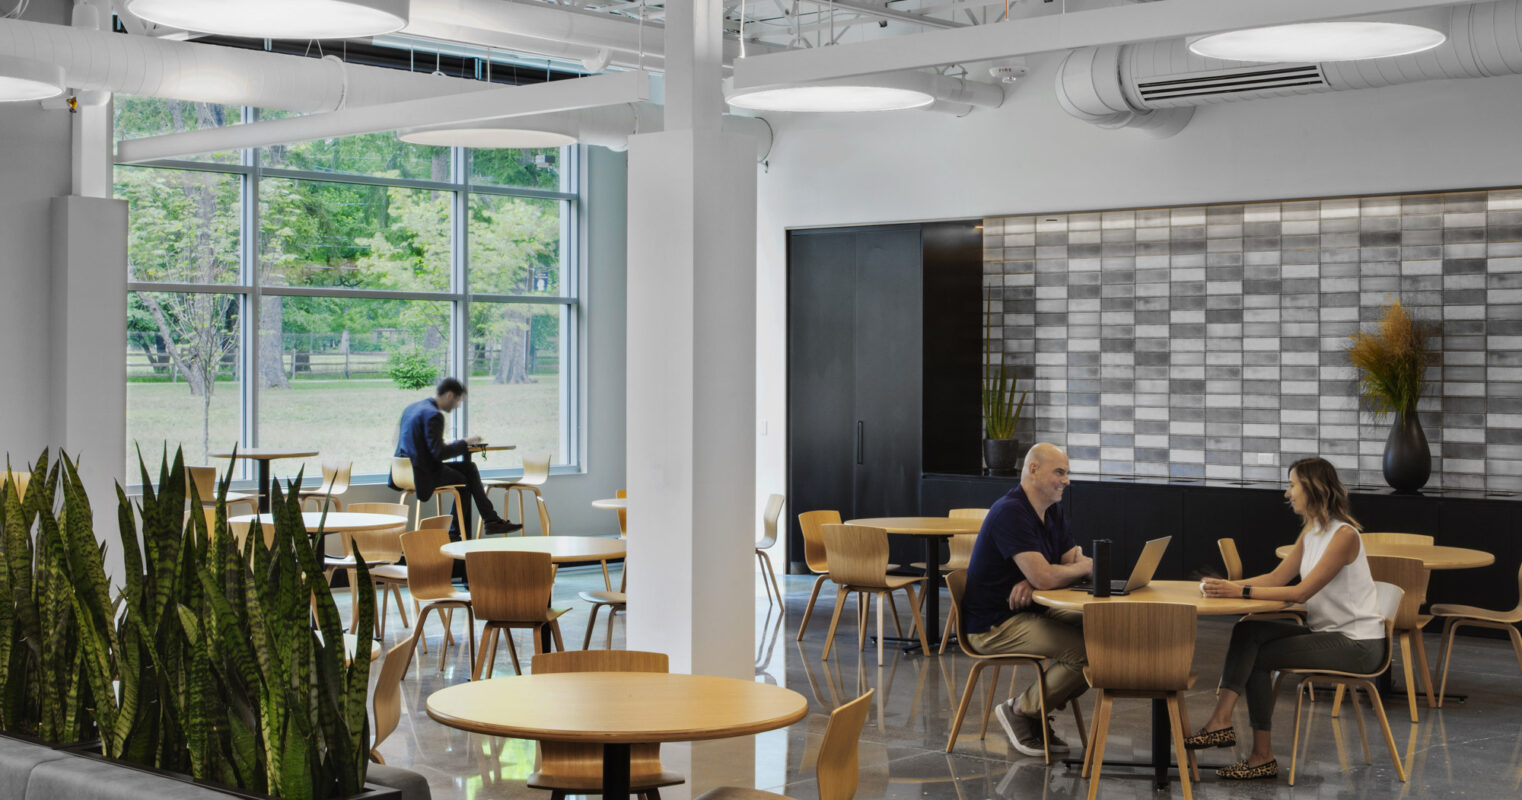 Modern office break room featuring natural light, with round wooden tables, beige chairs, and pendant lighting. A gray sofa flanks a green plant installation, enhancing the biophilic design. The exposed HVAC system adds an industrial touch above a geometrically tiled accent wall.